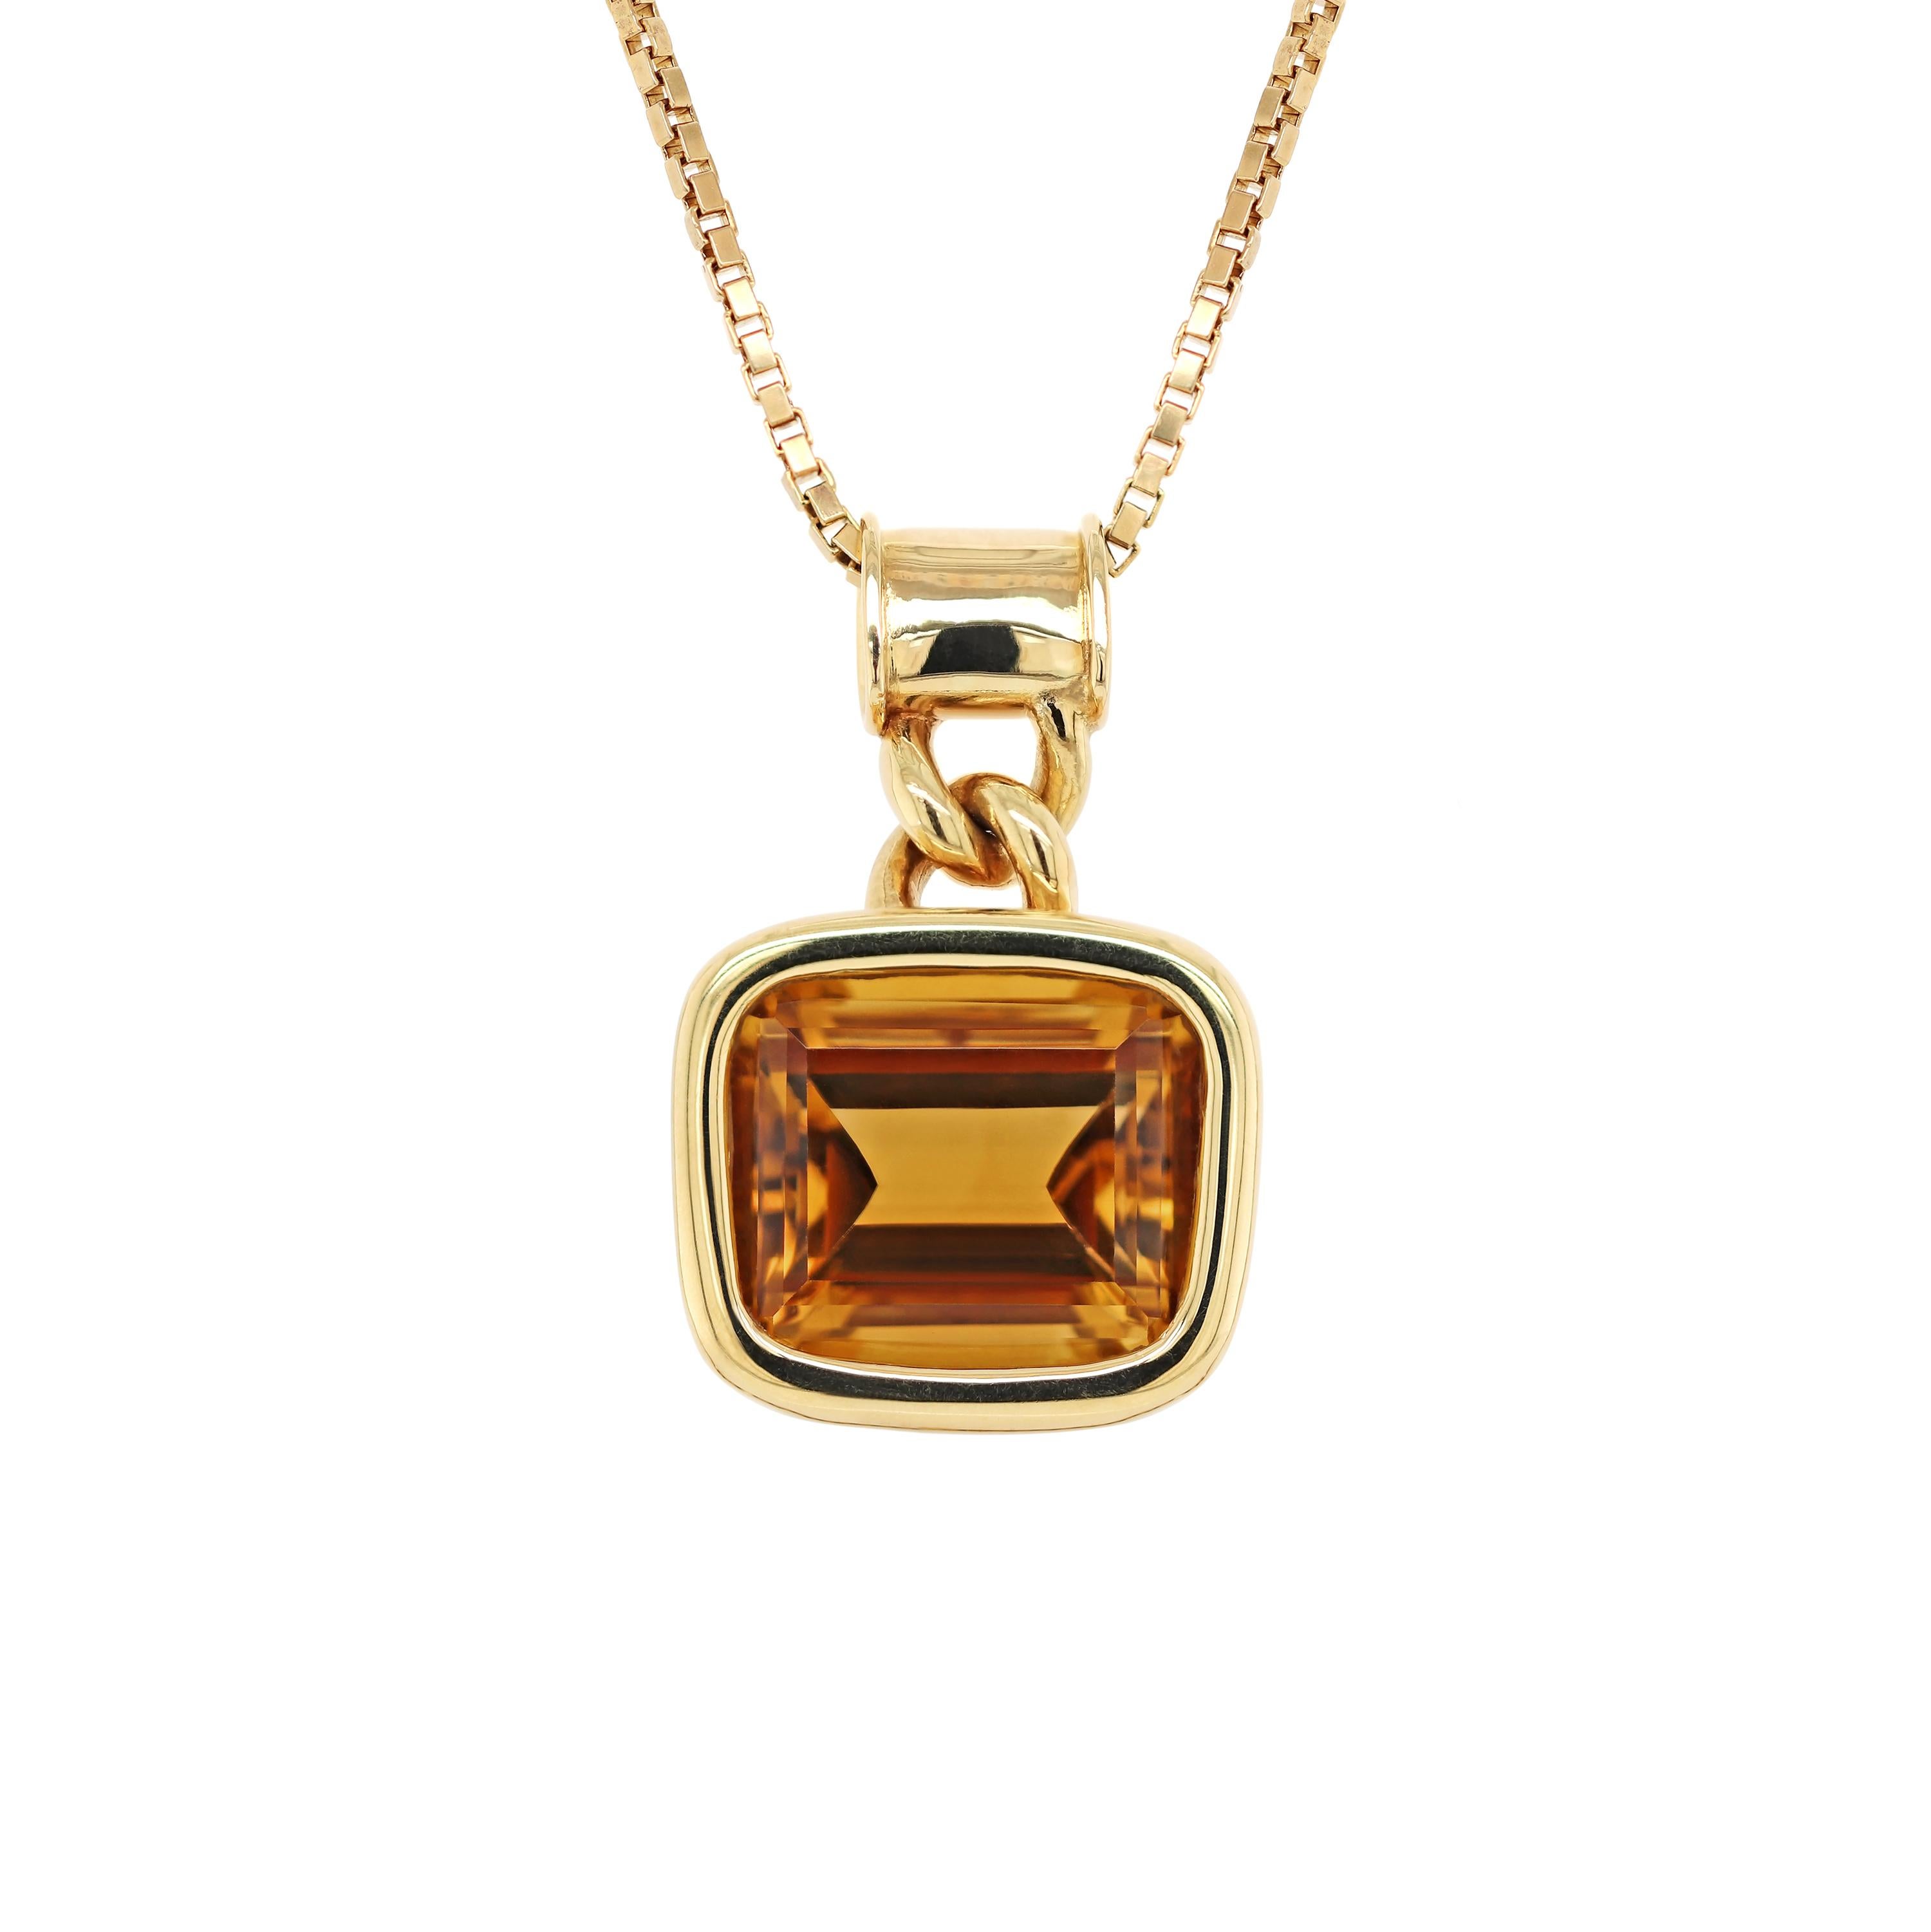 This impressive citrine set was designed by The House of Garrard, the longest serving jeweller in the world. 
The pendant features a beautiful golden citrine weighing approximately 40.00 carats mounted in a rub-over, open back setting. The pendant